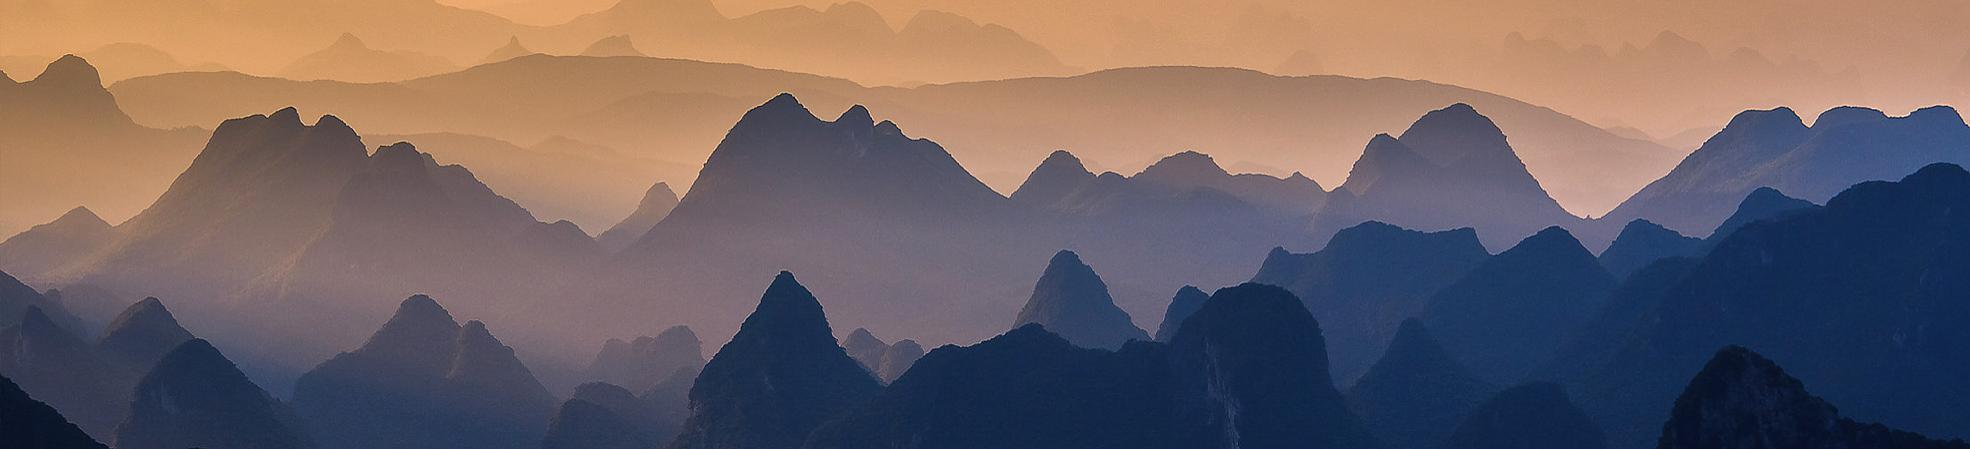 Mountains in Guilin